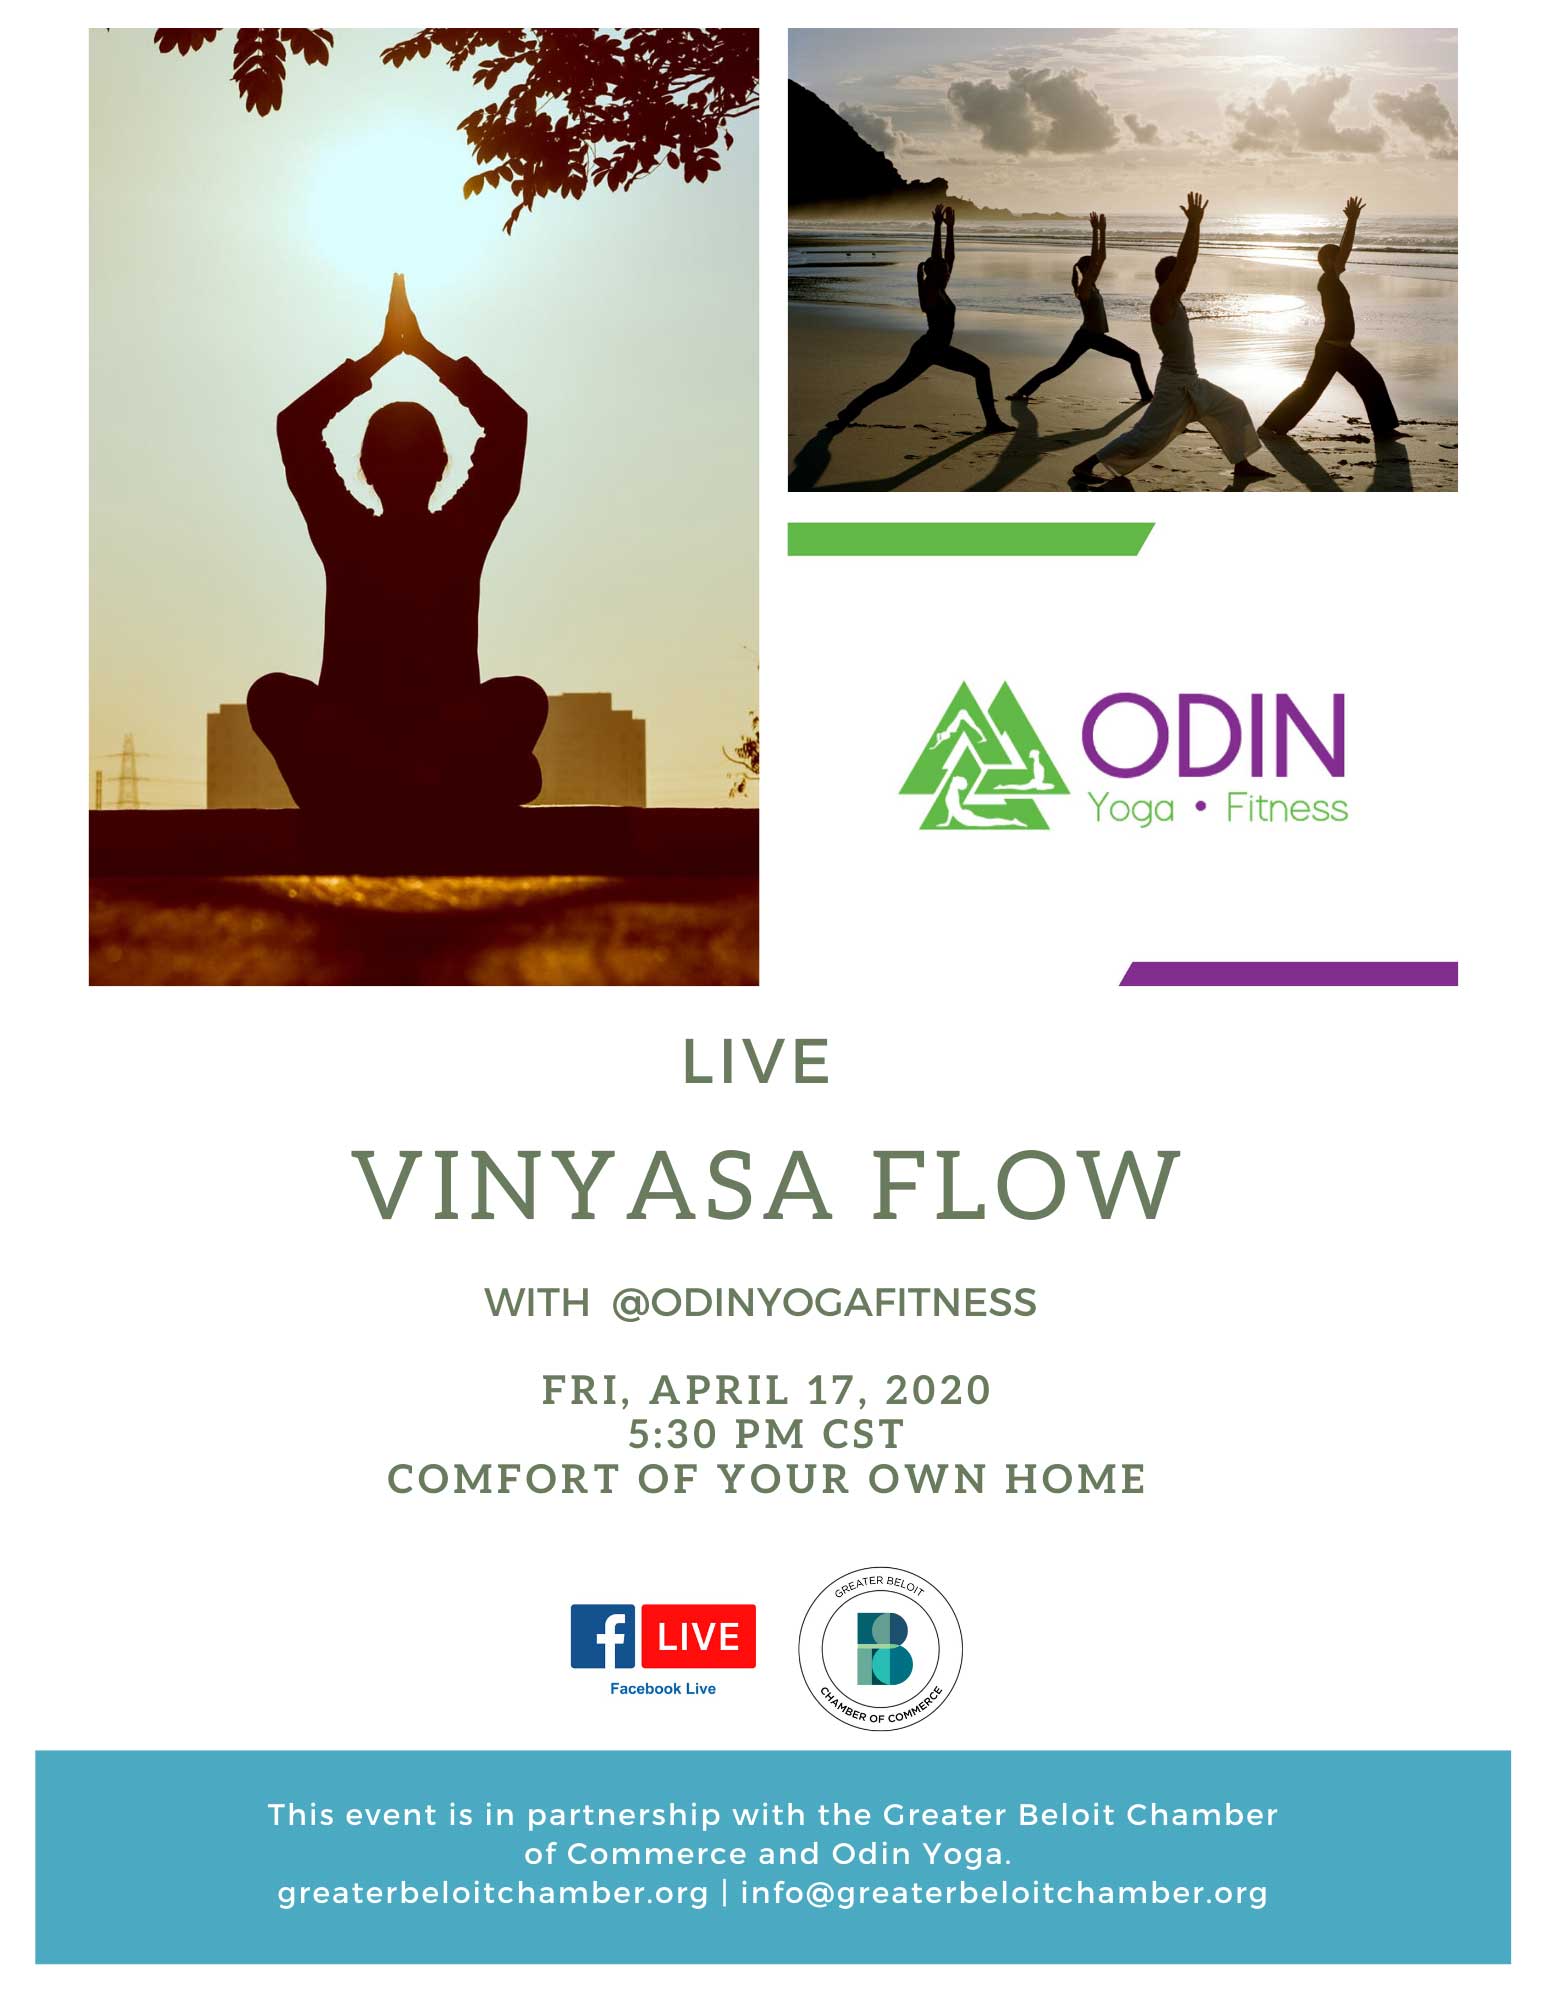 Live Event - Yoga with Odin